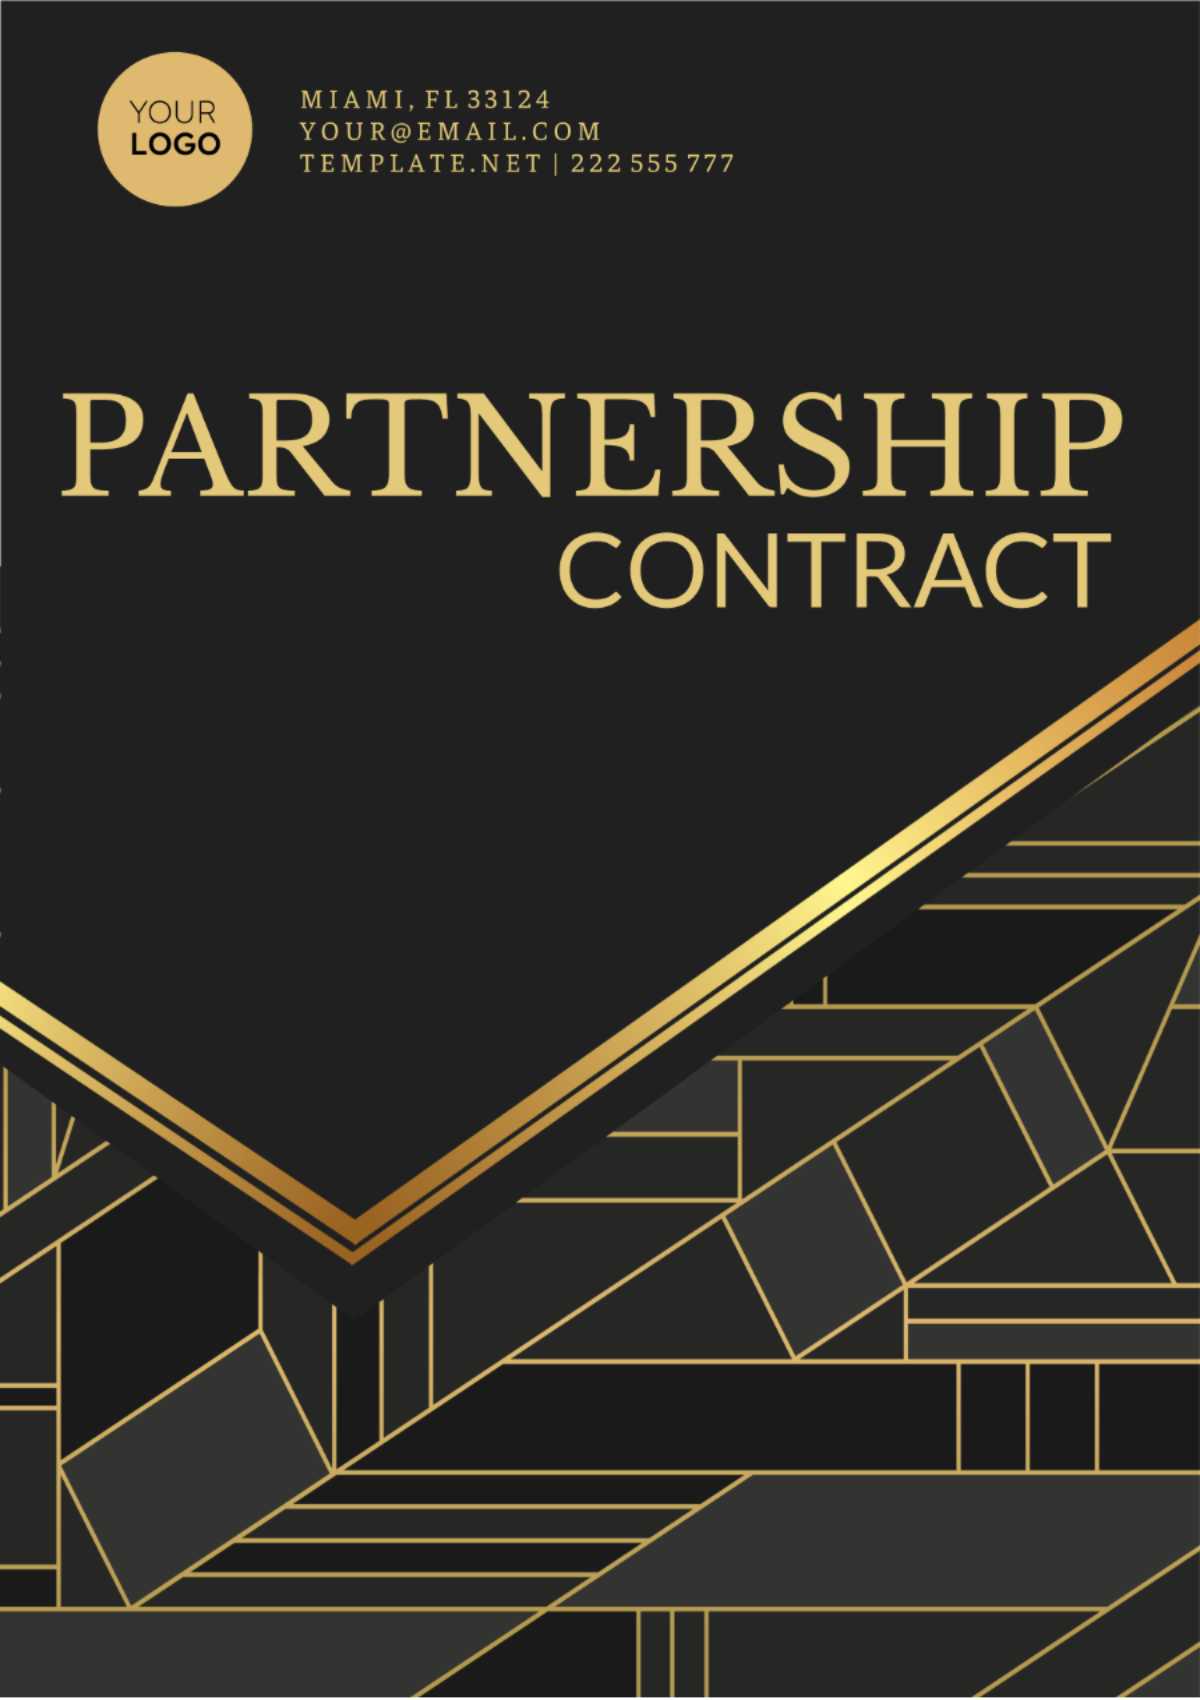 Free Partnership Contract Template